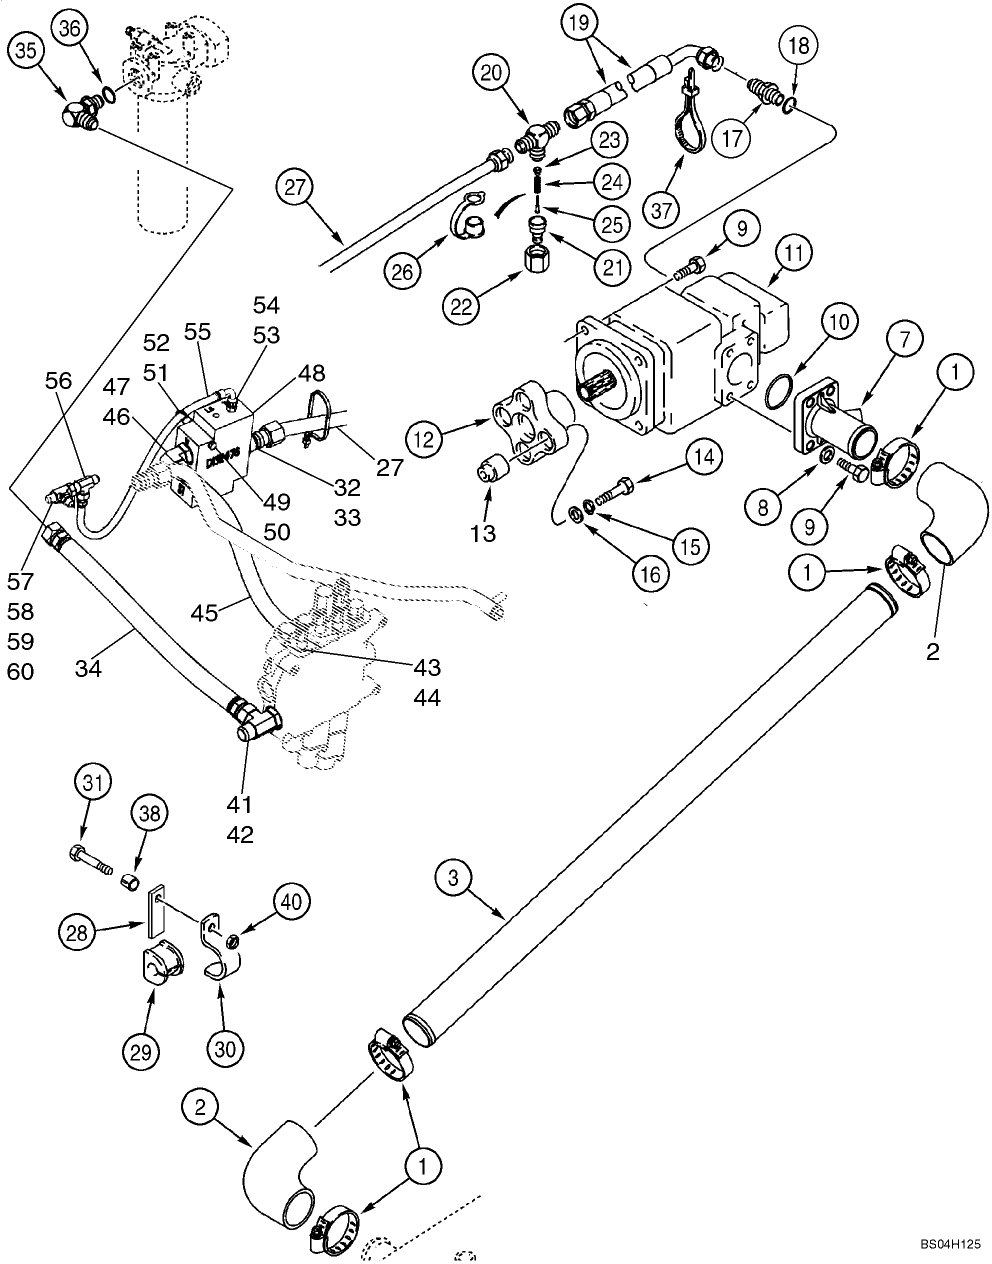 08 -01A HYDRAULICS - PUMP, FILTER AND LOADER VALVE (WITH HUSCO LOADER VALVE W/SEPARATE PRIORITY VALVE)